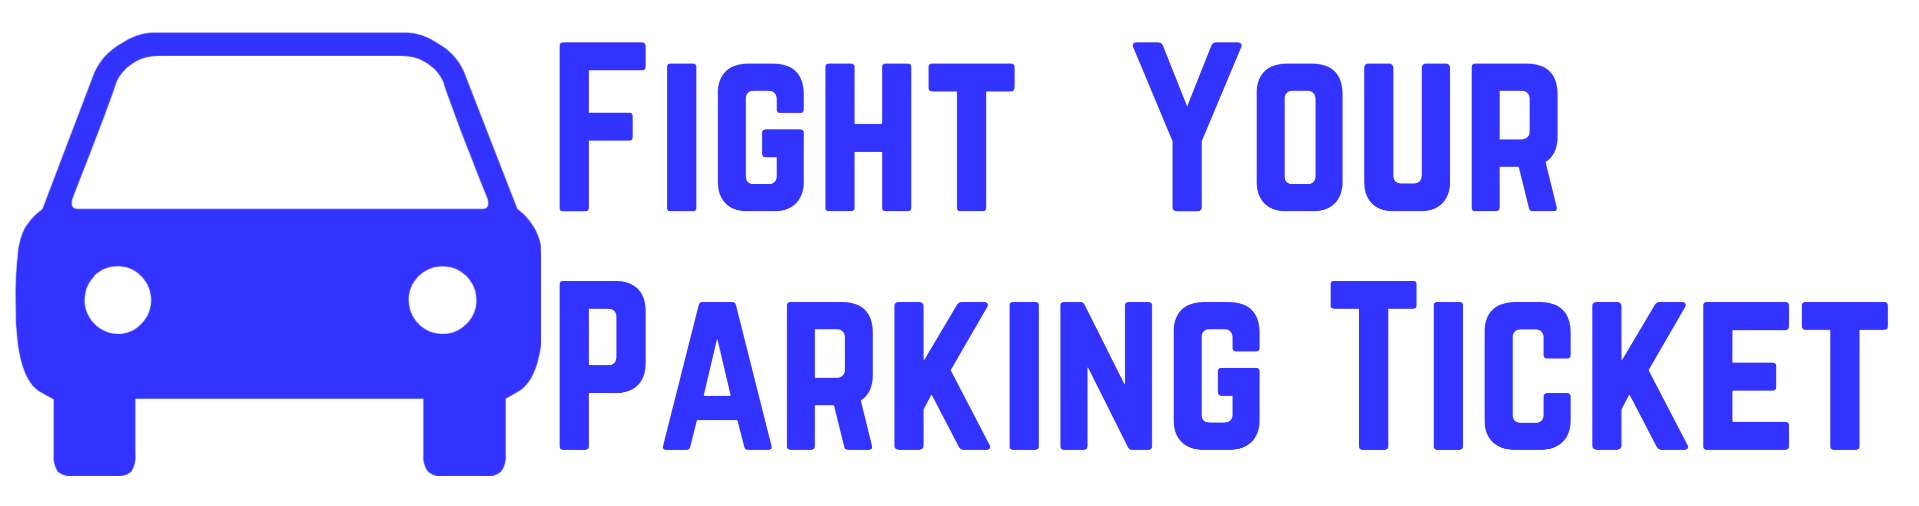 fight your parking ticket - logo